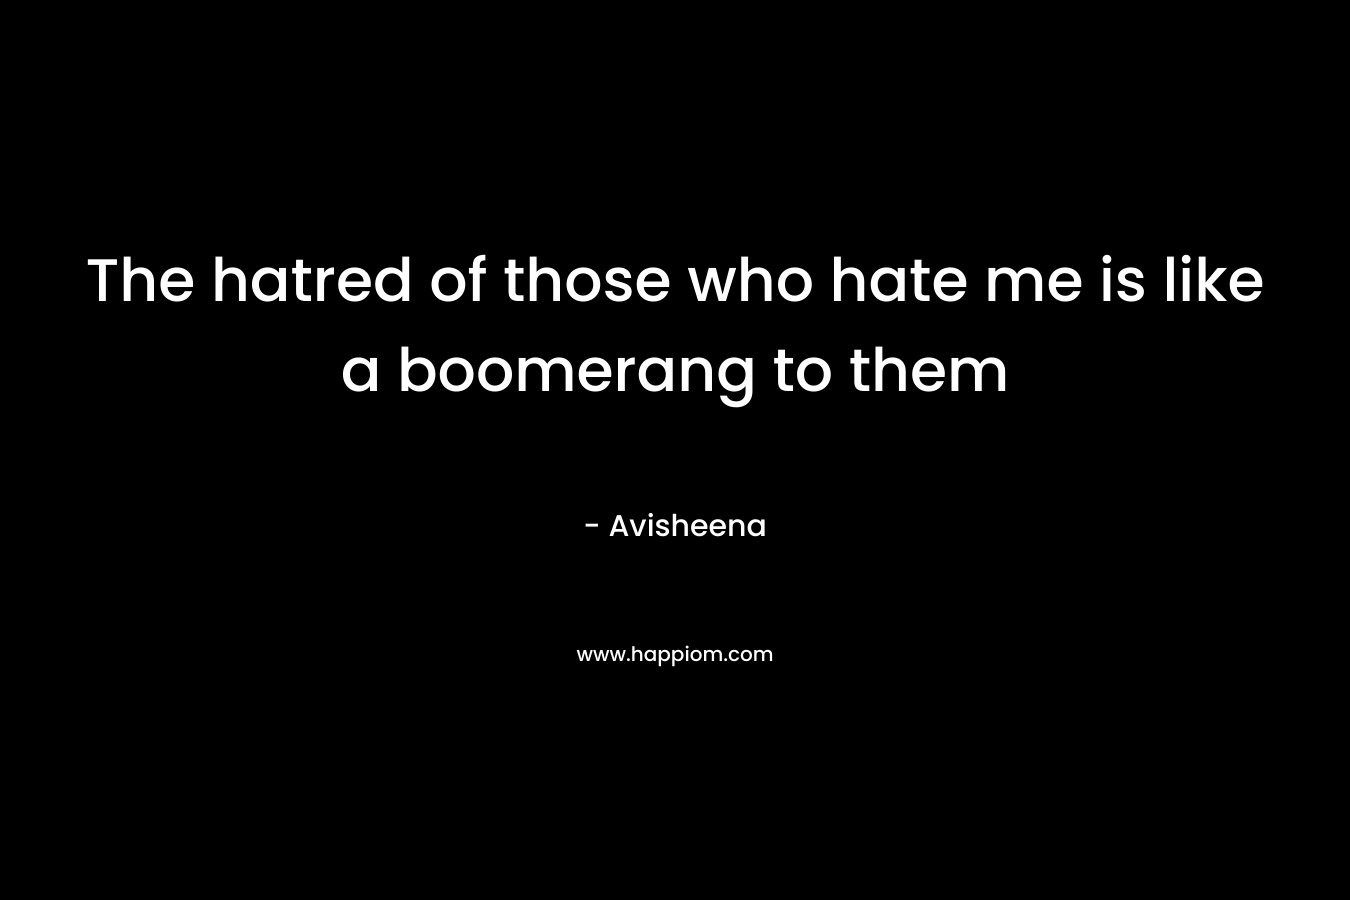 The hatred of those who hate me is like a boomerang to them